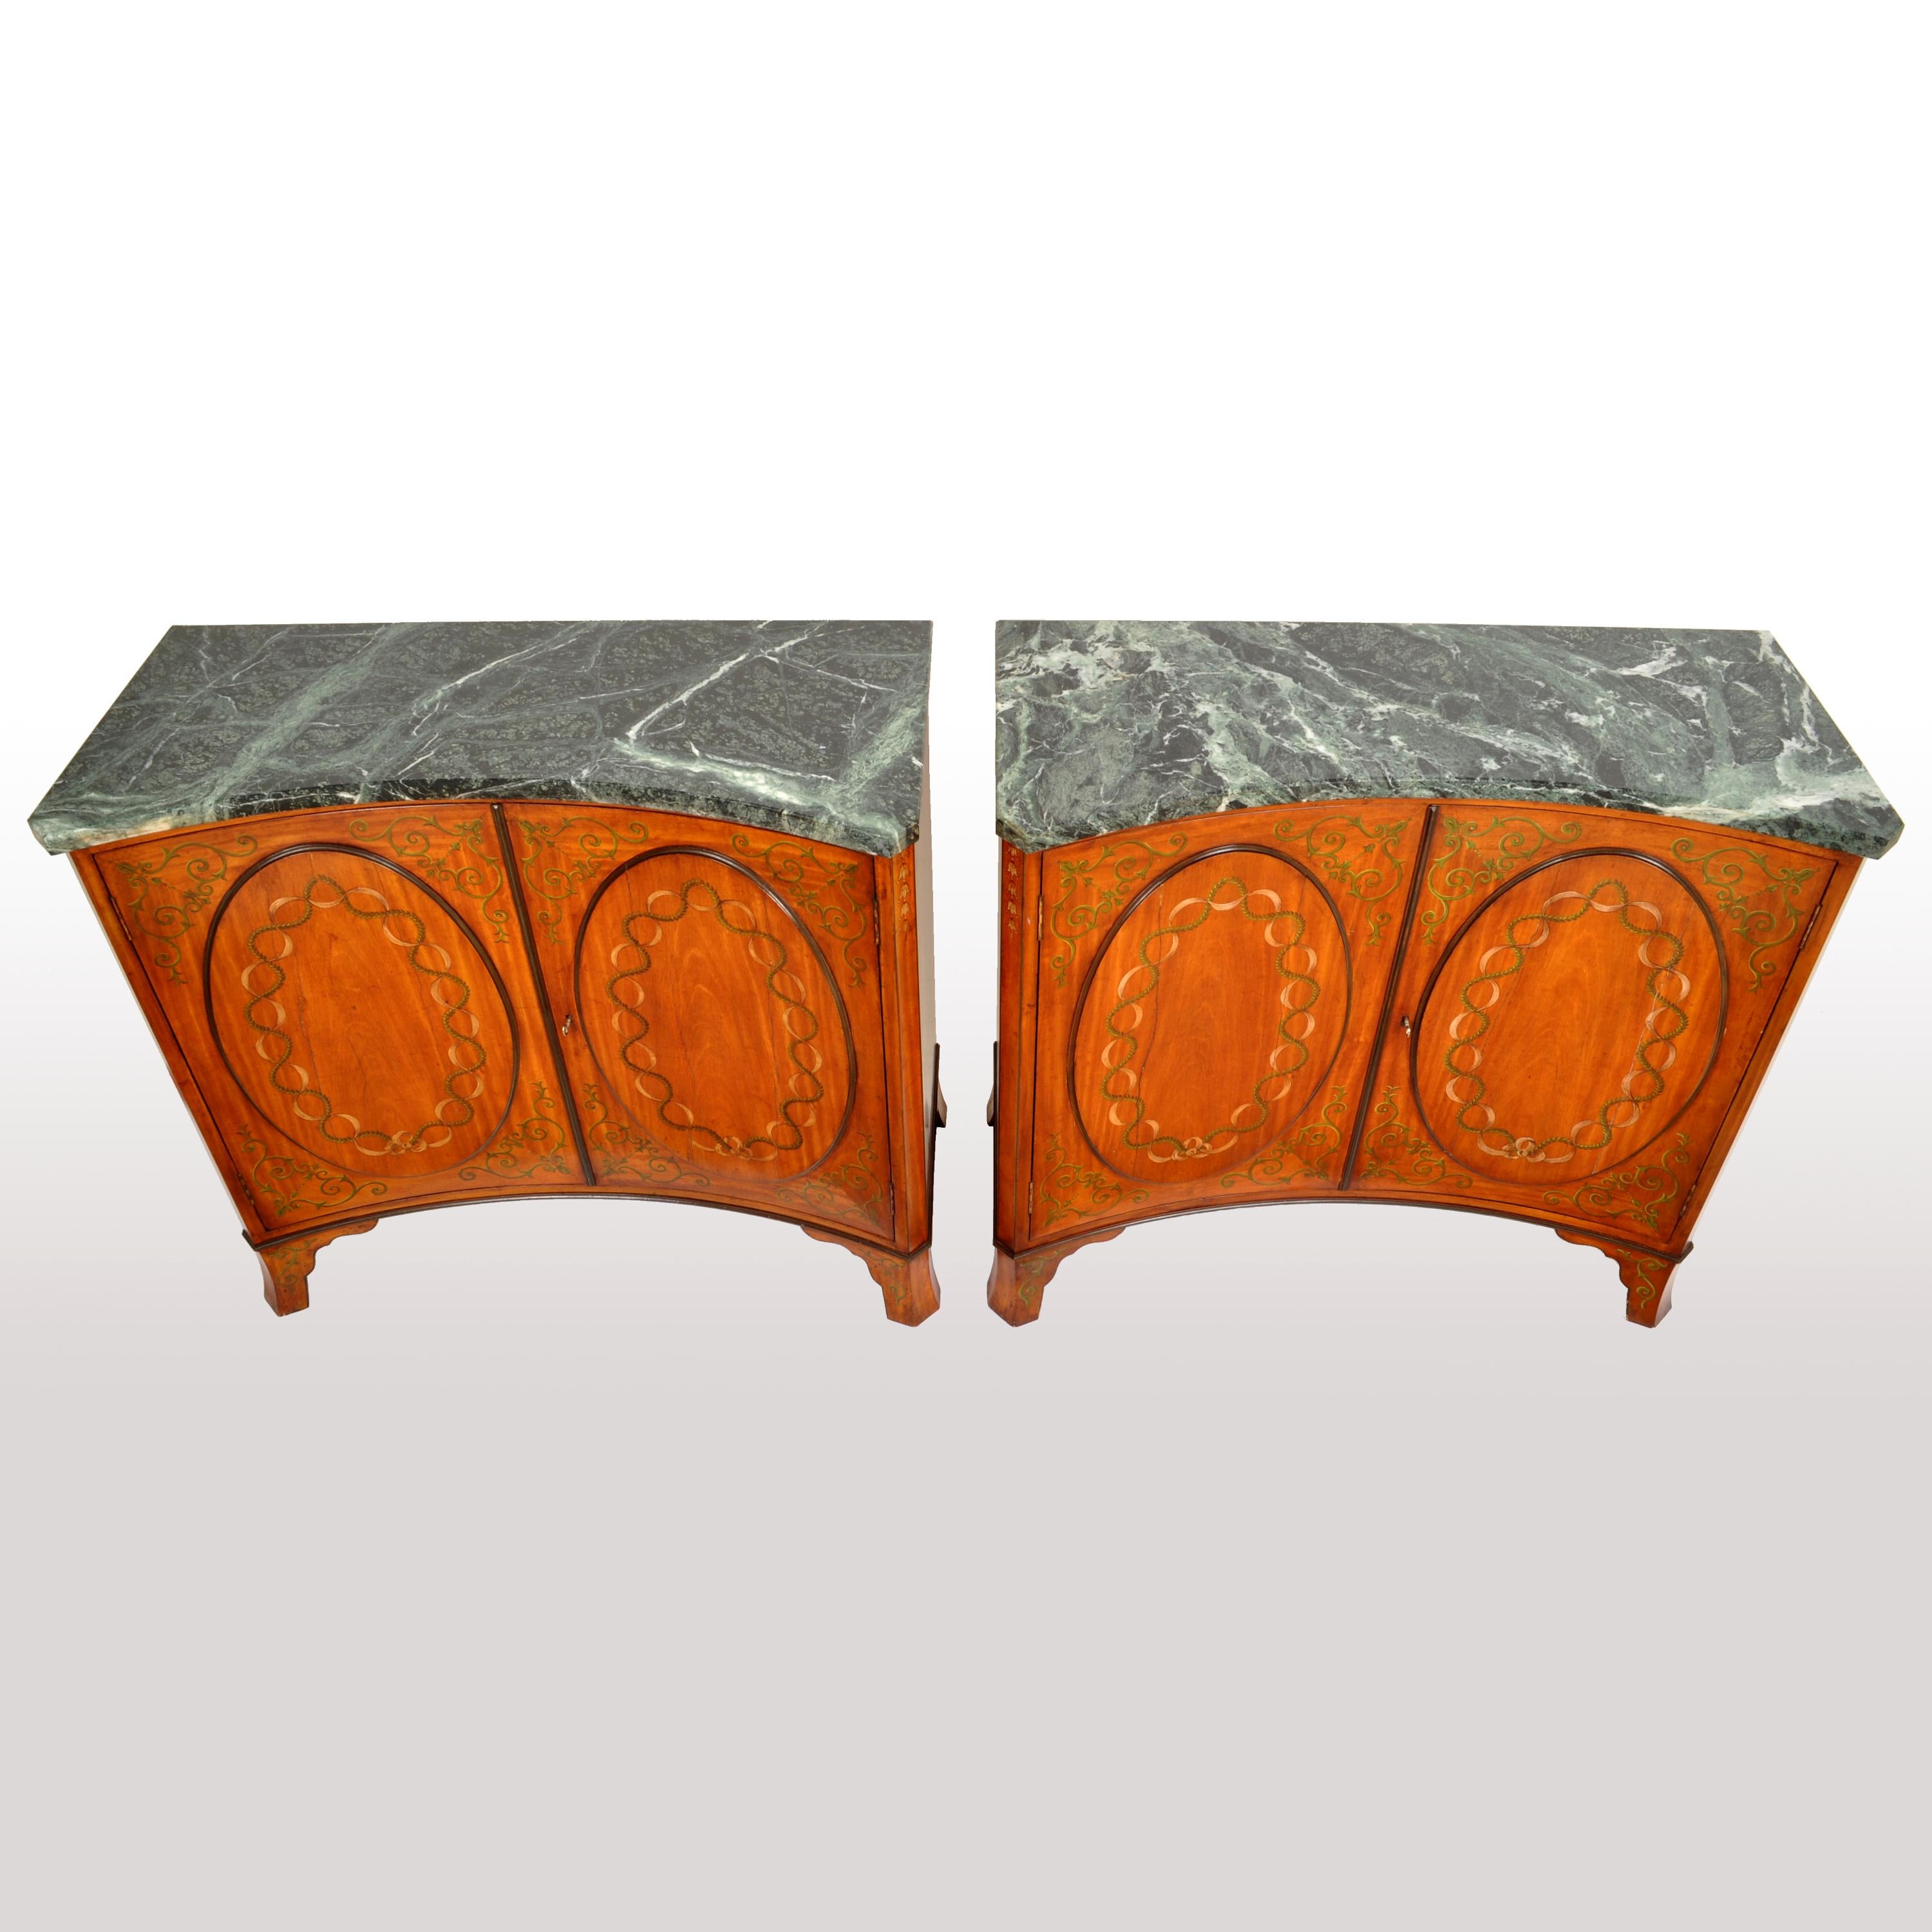 Pair of Antique Marble Top Painted Adam Revival Satinwood Commodes Cabinets 1880 In Good Condition In Portland, OR